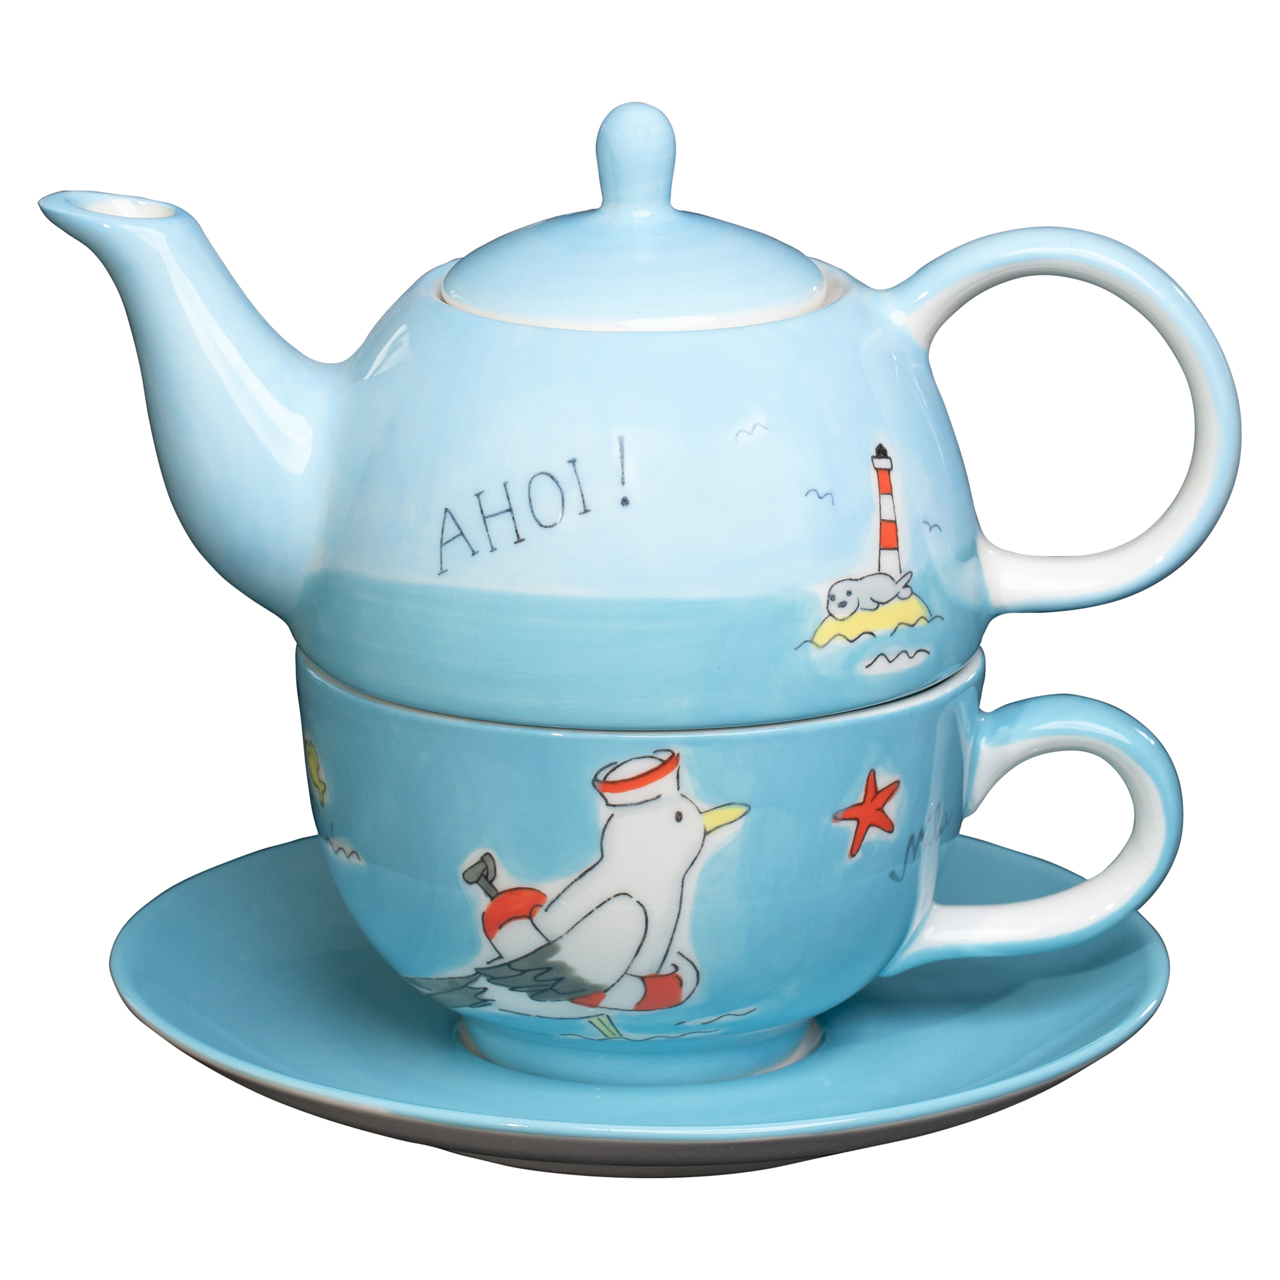 Tea for one - Ahoi